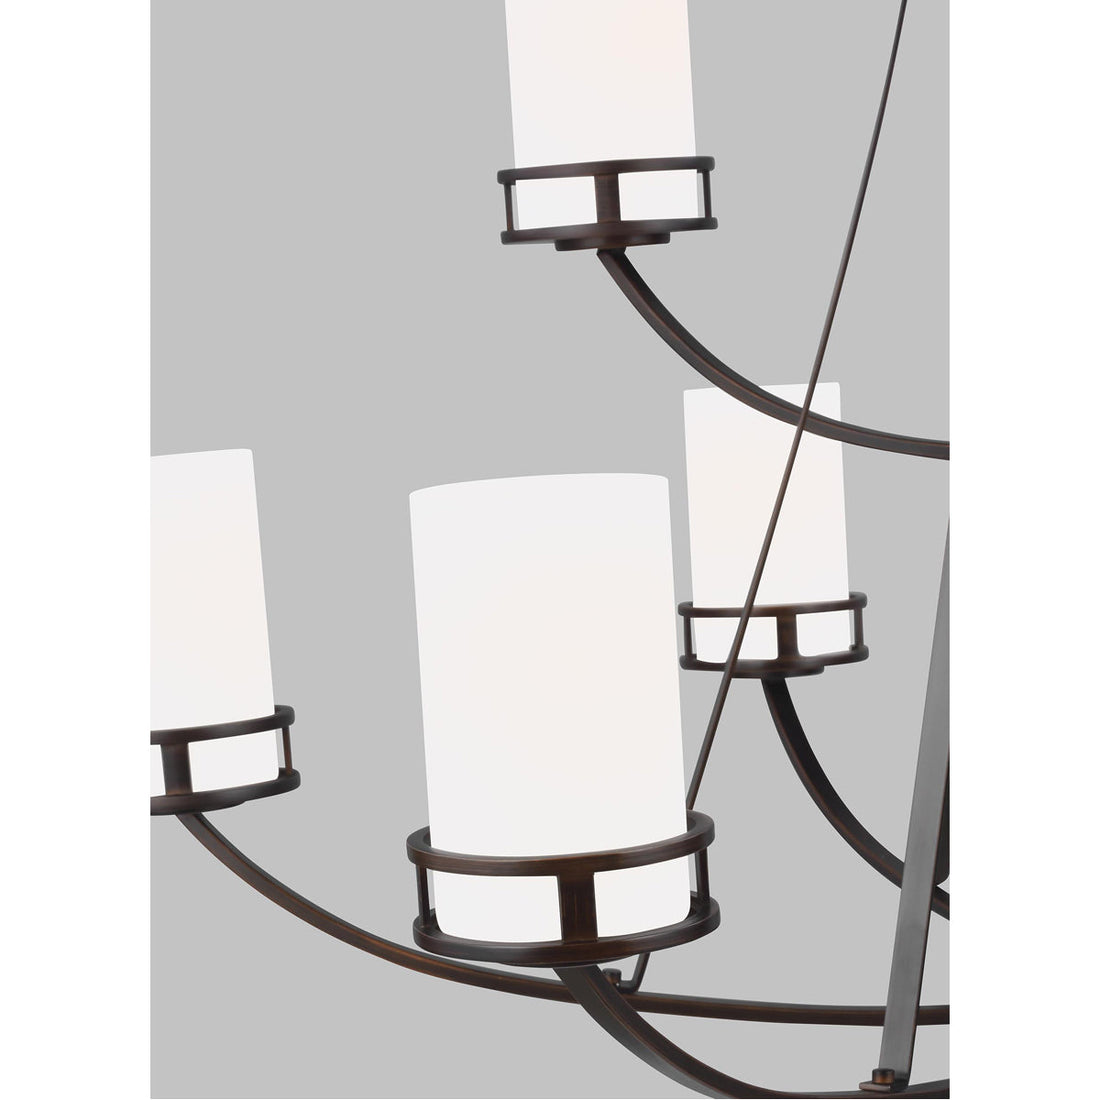 Sea Gull Lighting Robie 12-Light Chandelier without Bulb